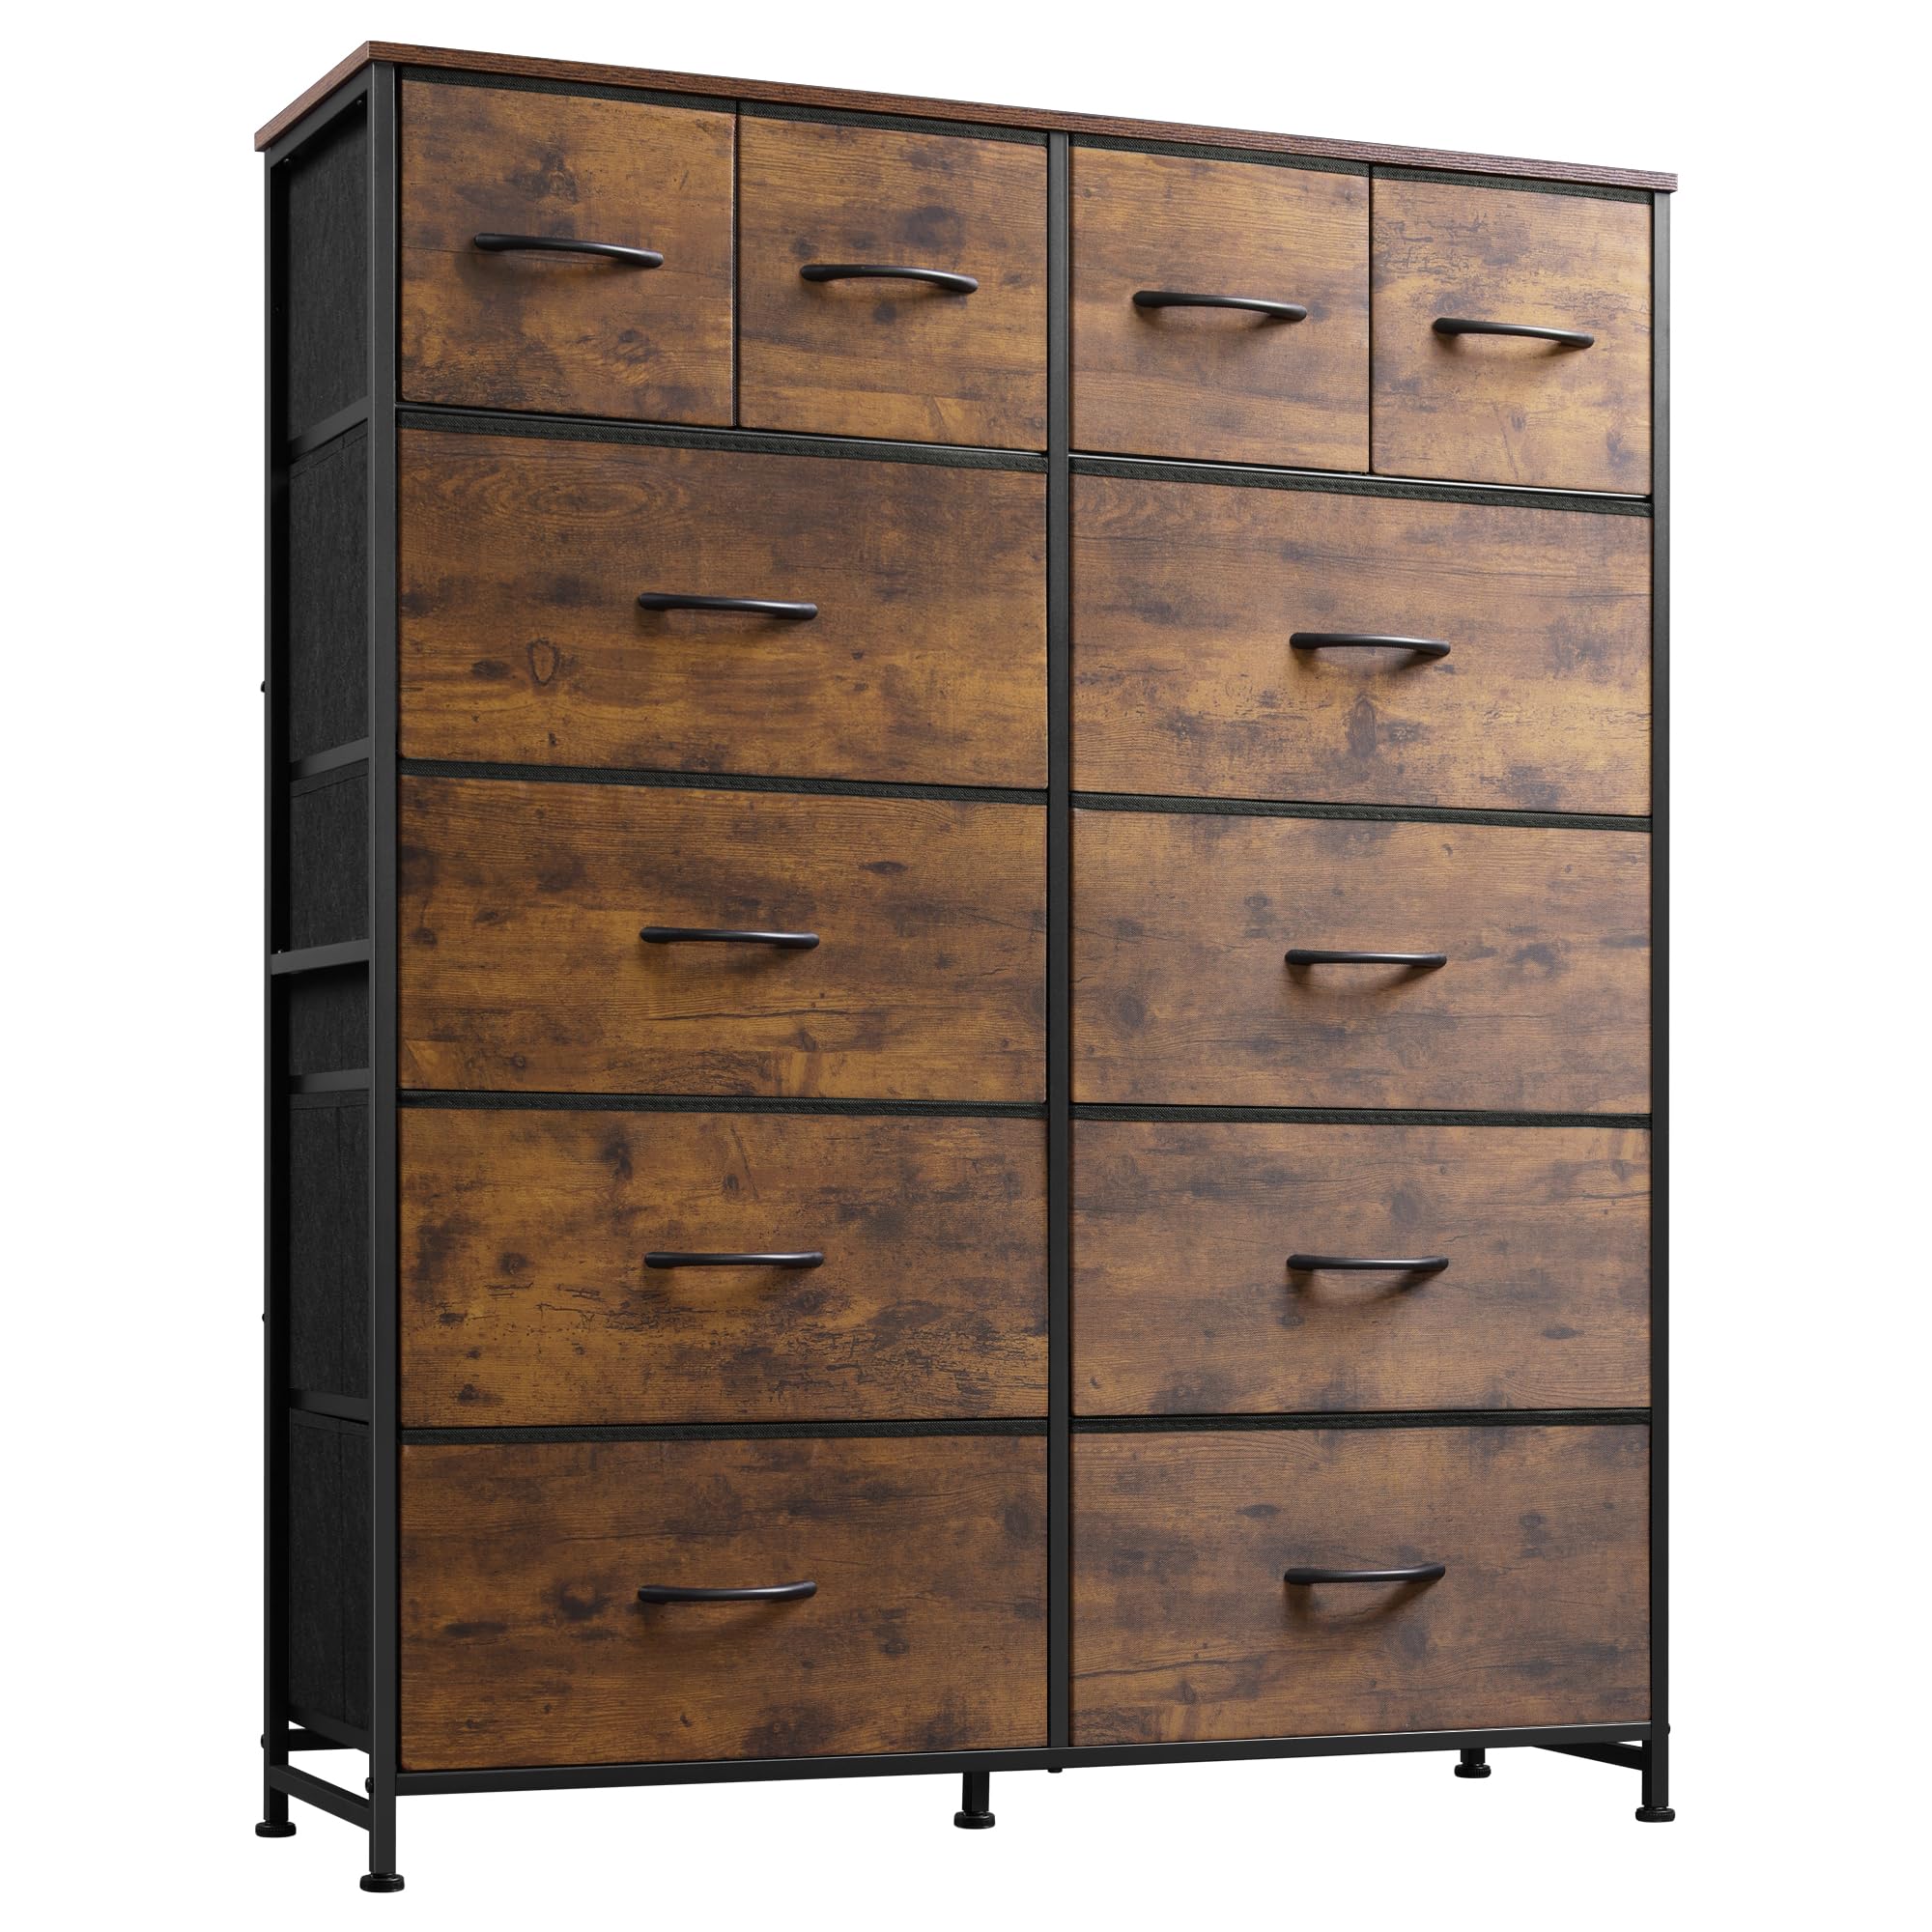 WLIVE Tall Dresser for Bedroom with 12 Drawers, Dressers & Chests of Drawers, Fabric Dresser for Bedroom, Closet, Fabric Storage Dresser with Drawers, Steel Frame, Rustic Brown Wood Grain Print